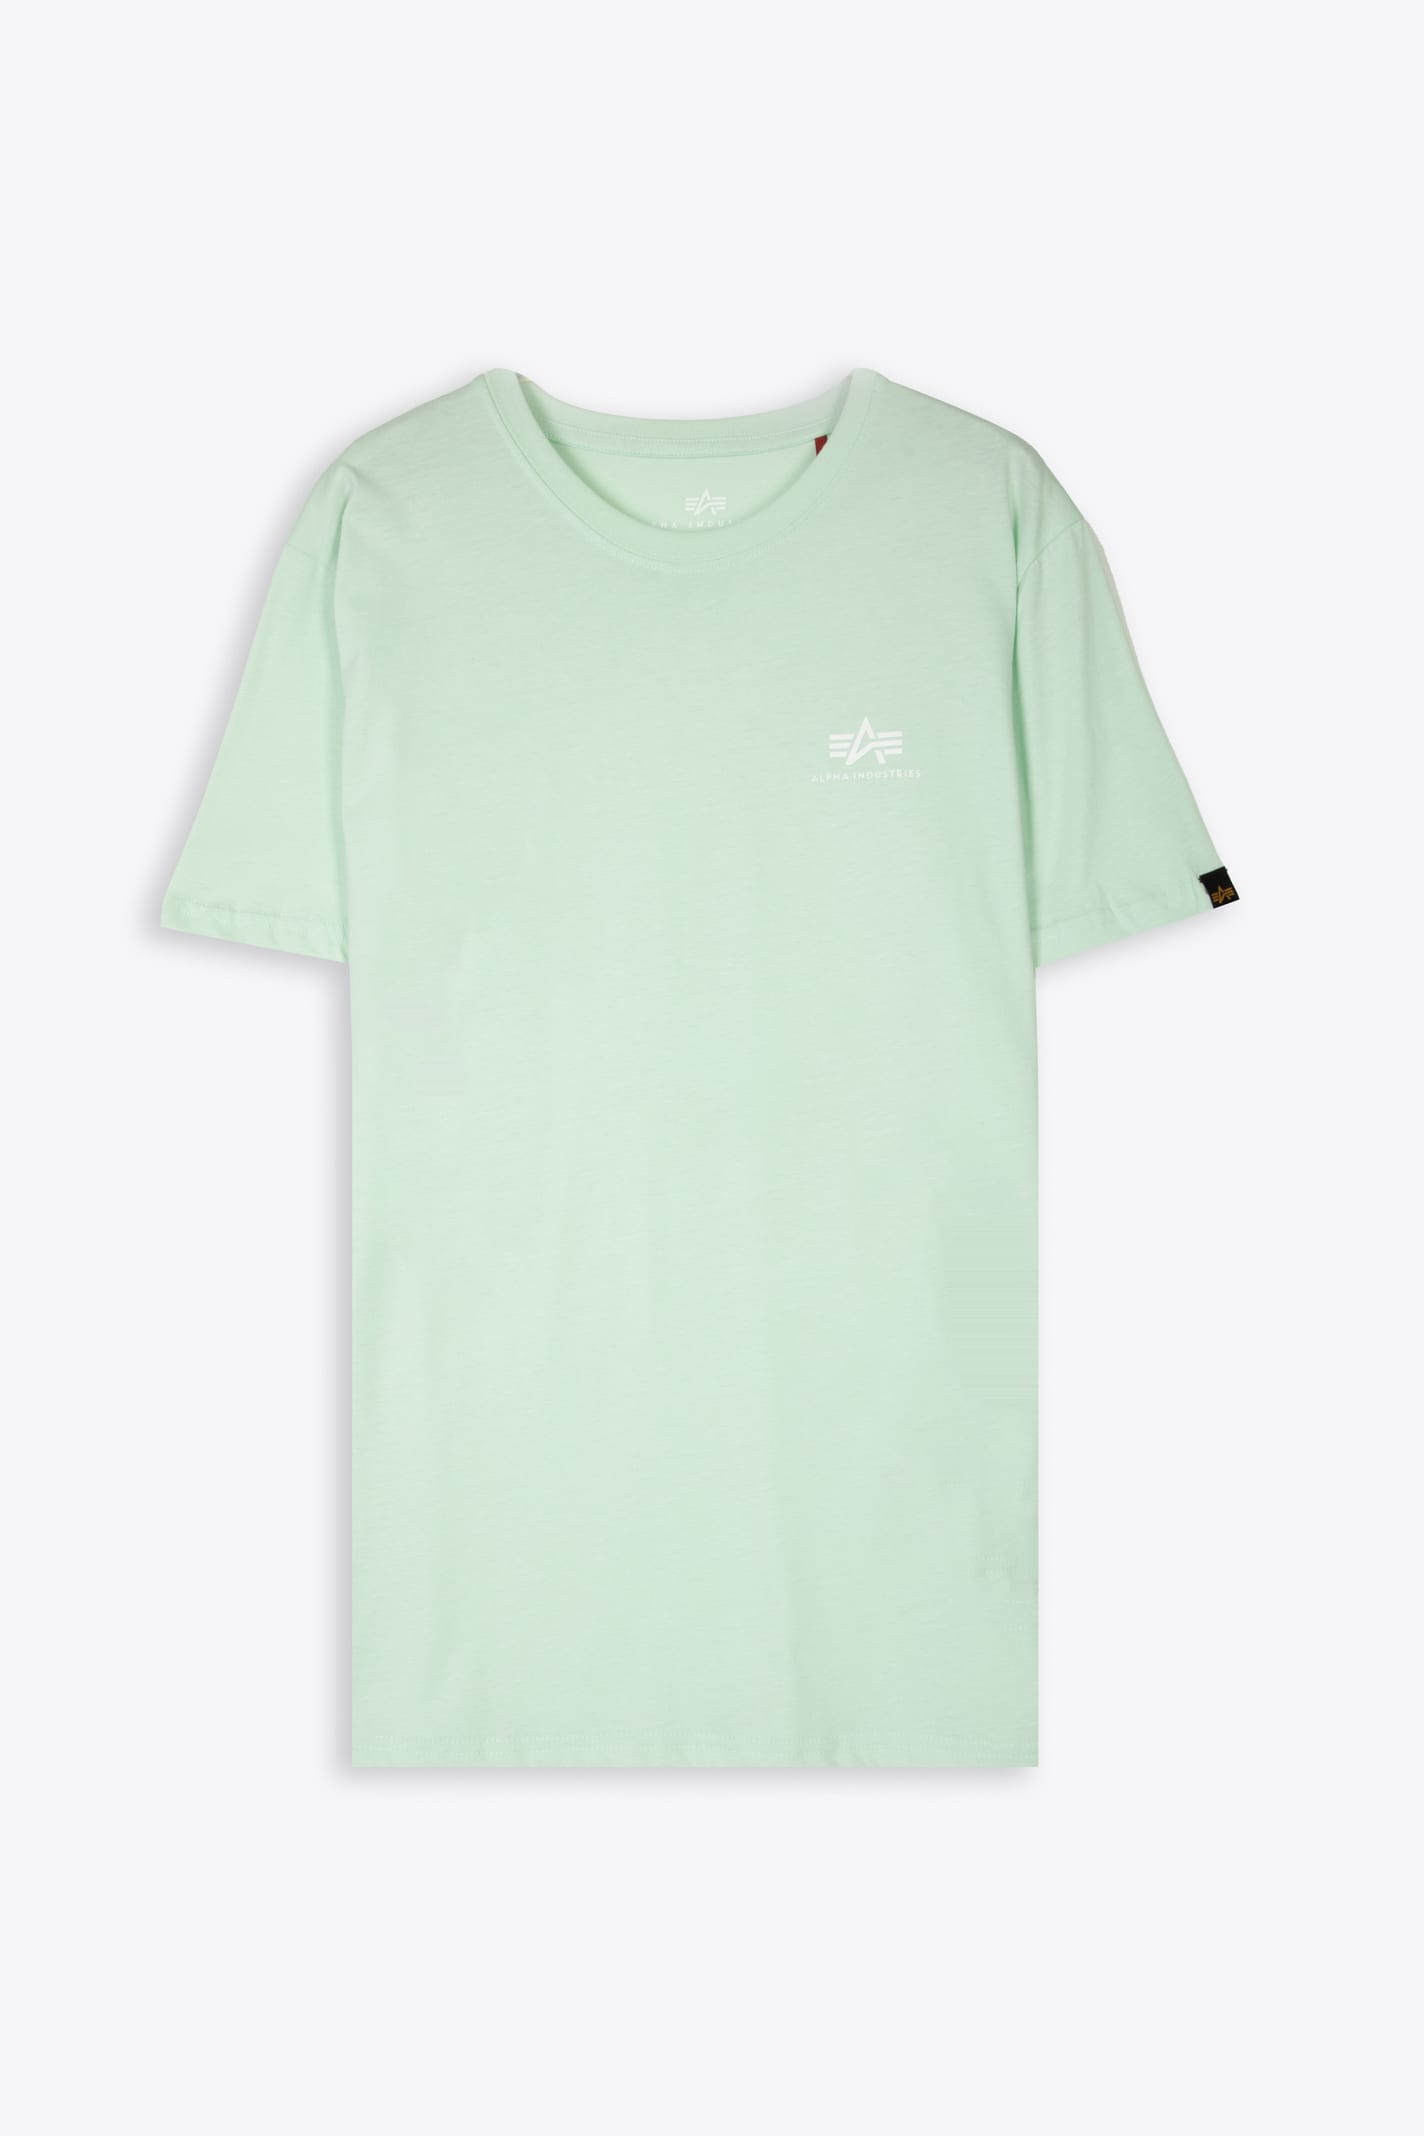 Alpha Industries Basic T Small Logo Mint green cotton t-shirt with chest logo